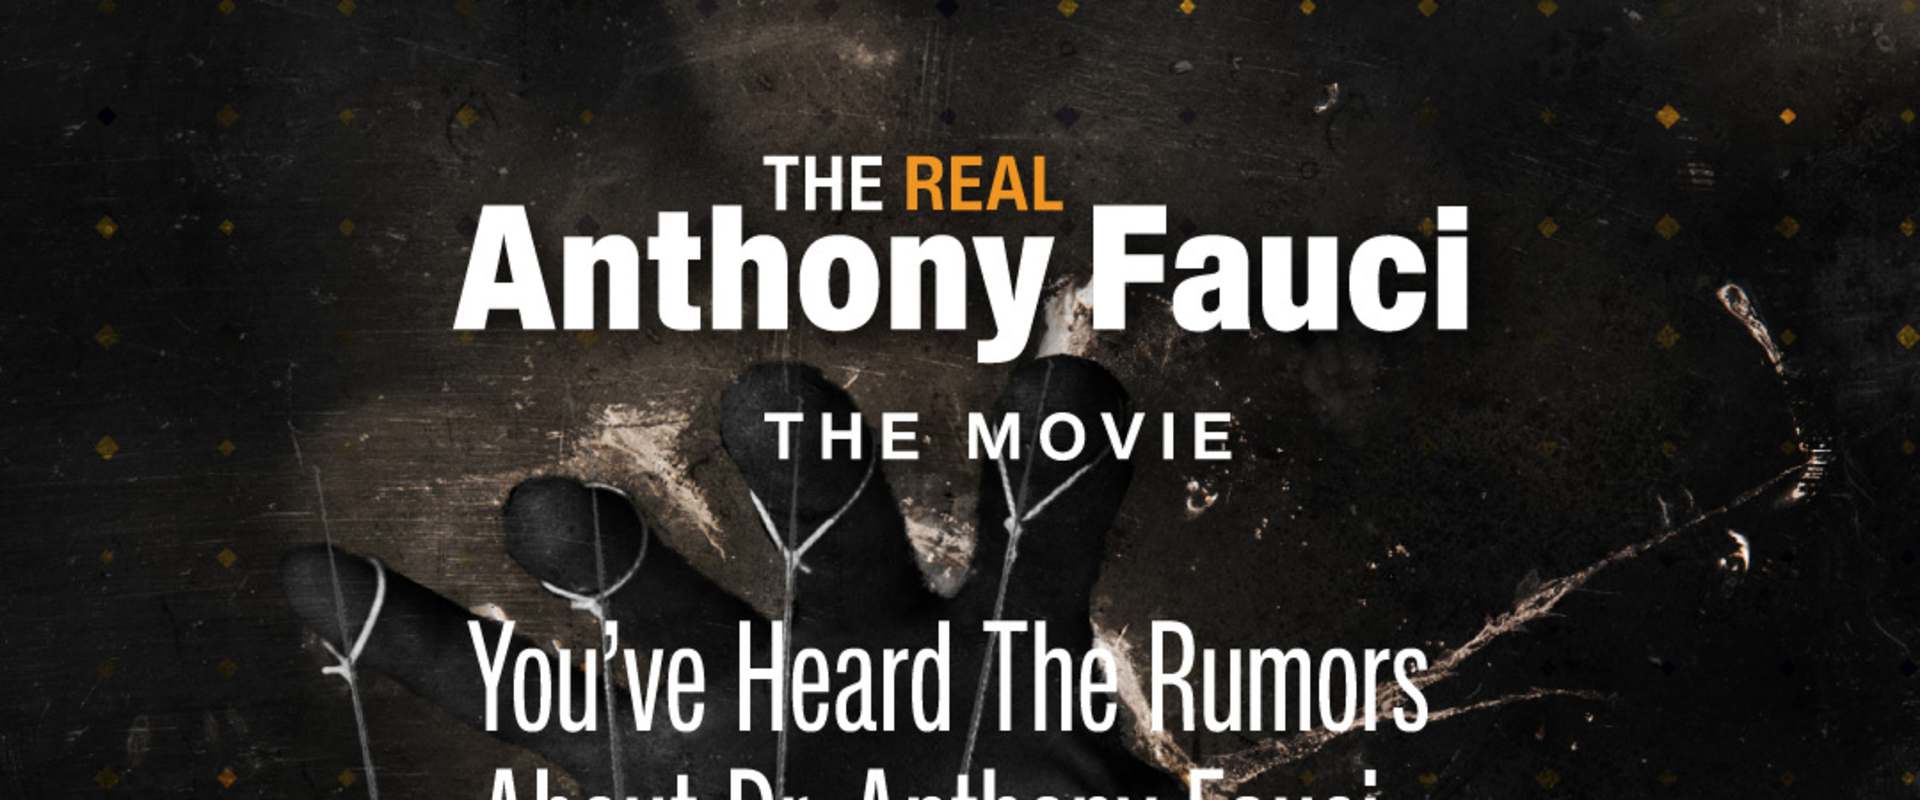 The Real Anthony Fauci background 1